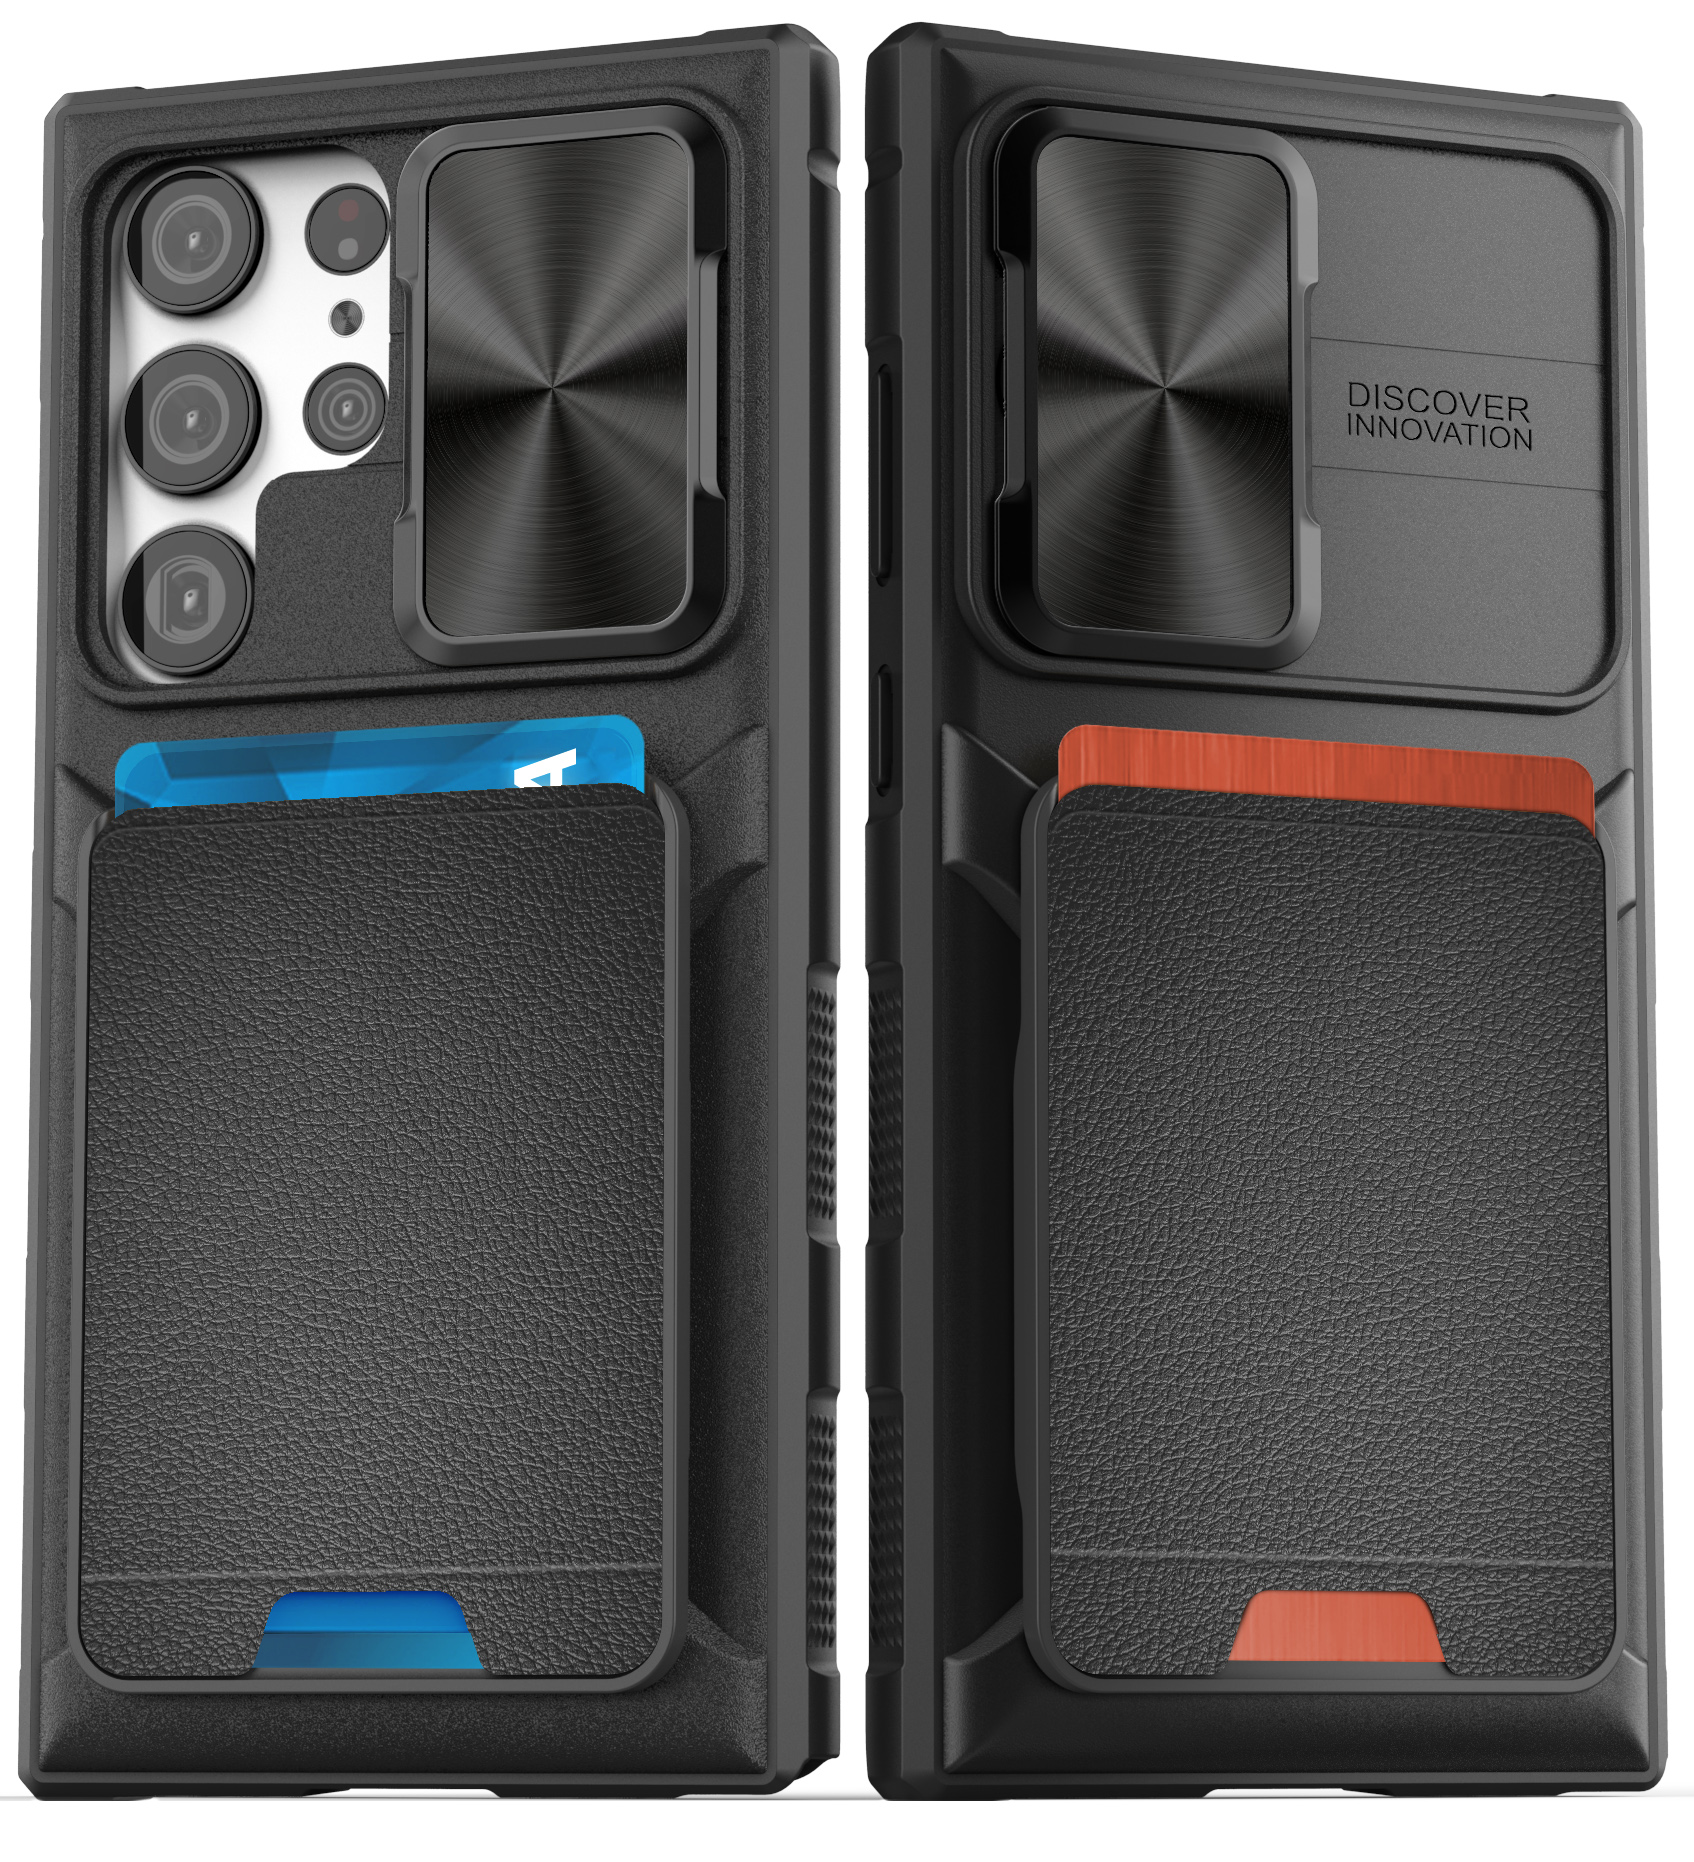 Samsung Galaxy S23 Ultra Case with Camera Lens Protector and